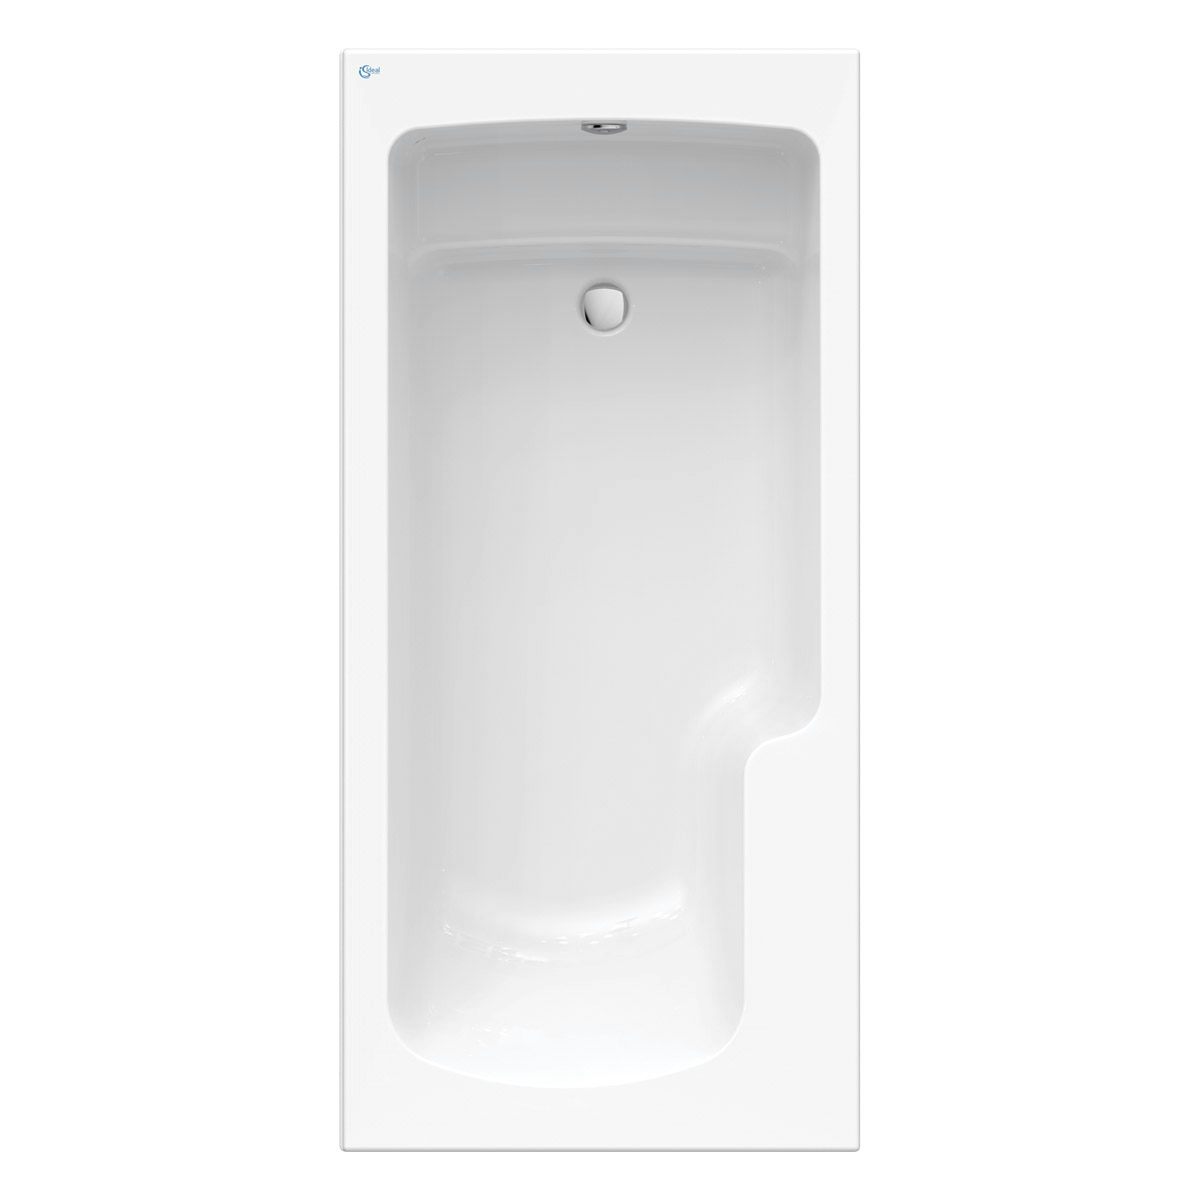 Ideal Standard Concept Freedom Idealform Plus right handed single ended bath 1700 x 800 with front bath panel and bath waste